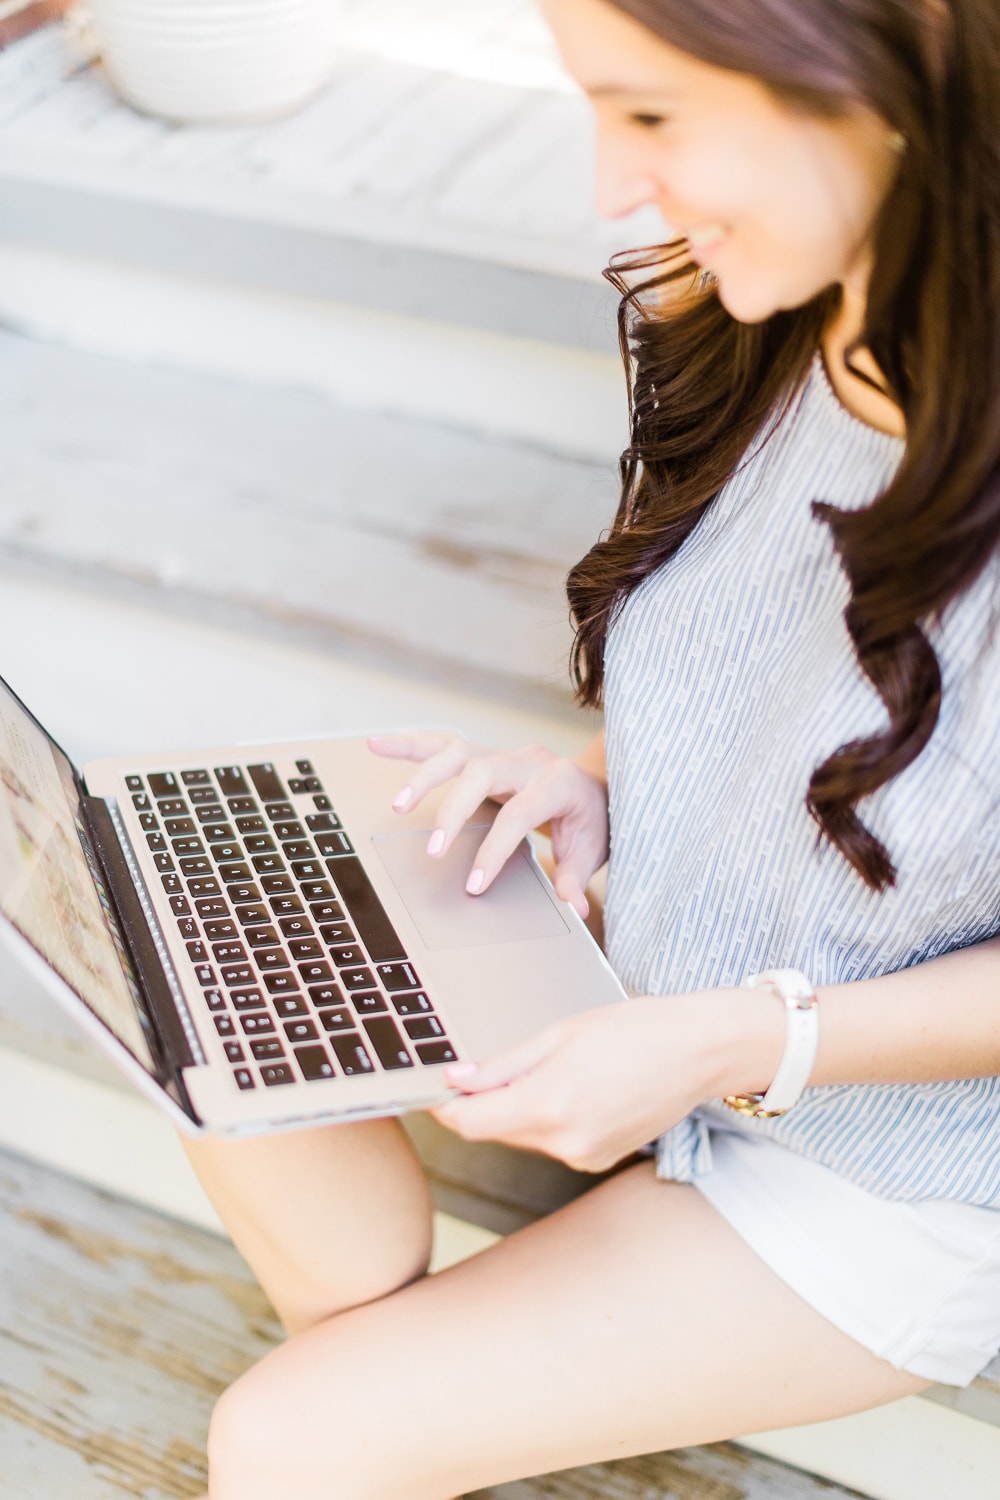 Blogger Stephanie Ziajka shares how the GoDaddy Open We Stand chat on LinkedIn has helped her small business survive COVID-19 on Diary of a Debutante